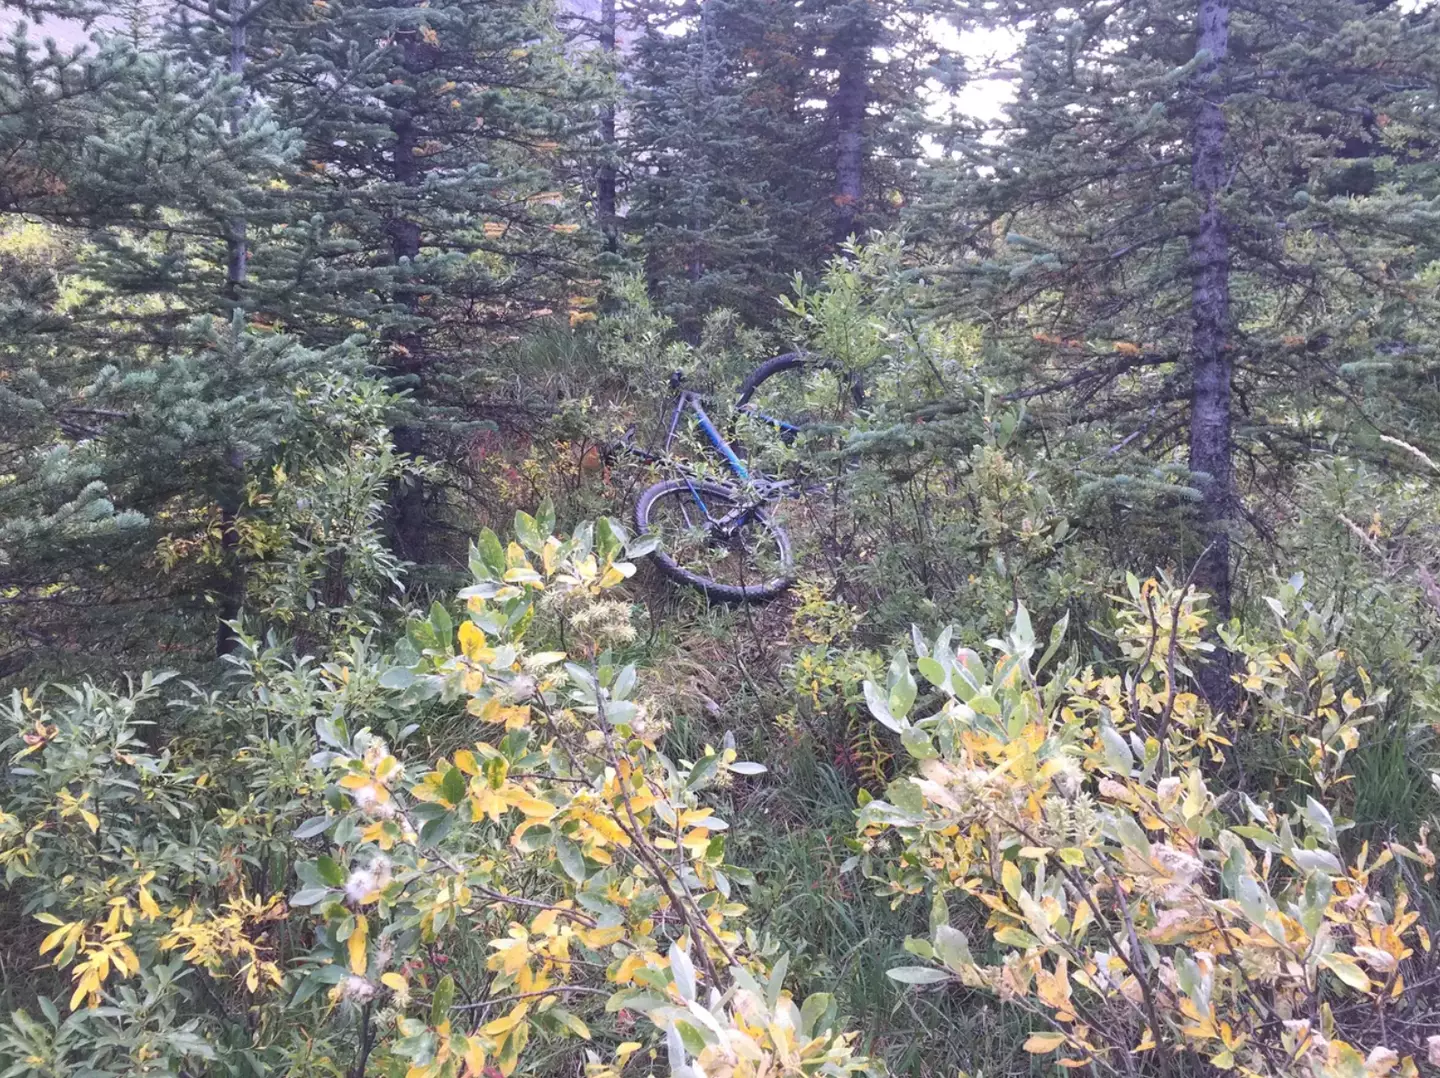 Jeremy threw his bike to stop the bear.